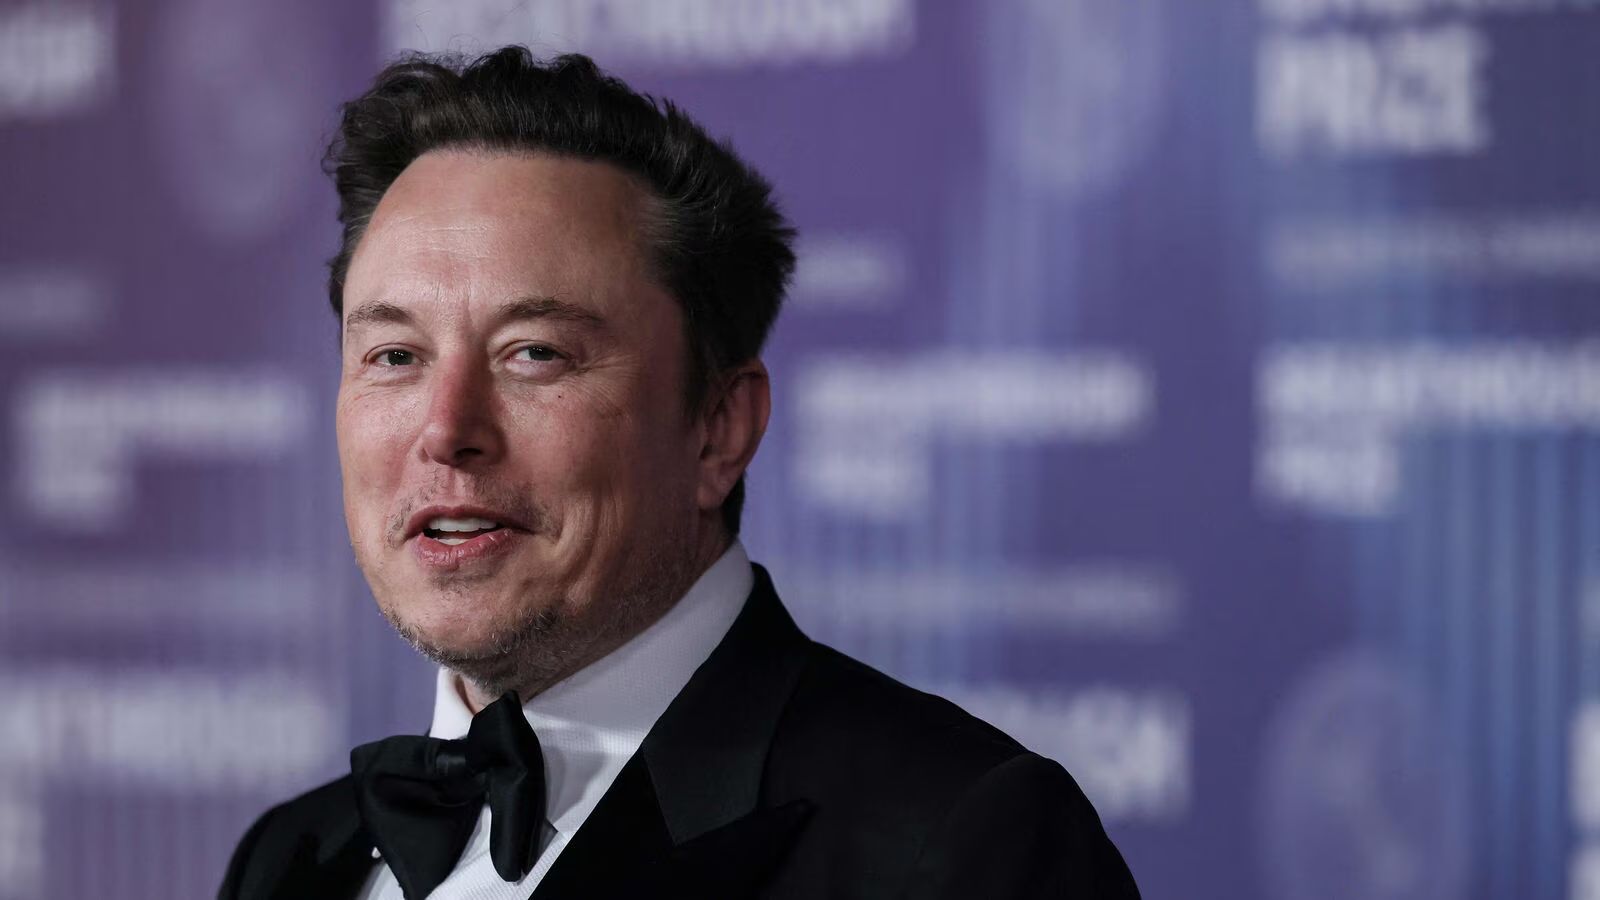 The Ingenious Rule From Elon Musk That Could Transform Your Daily Routine